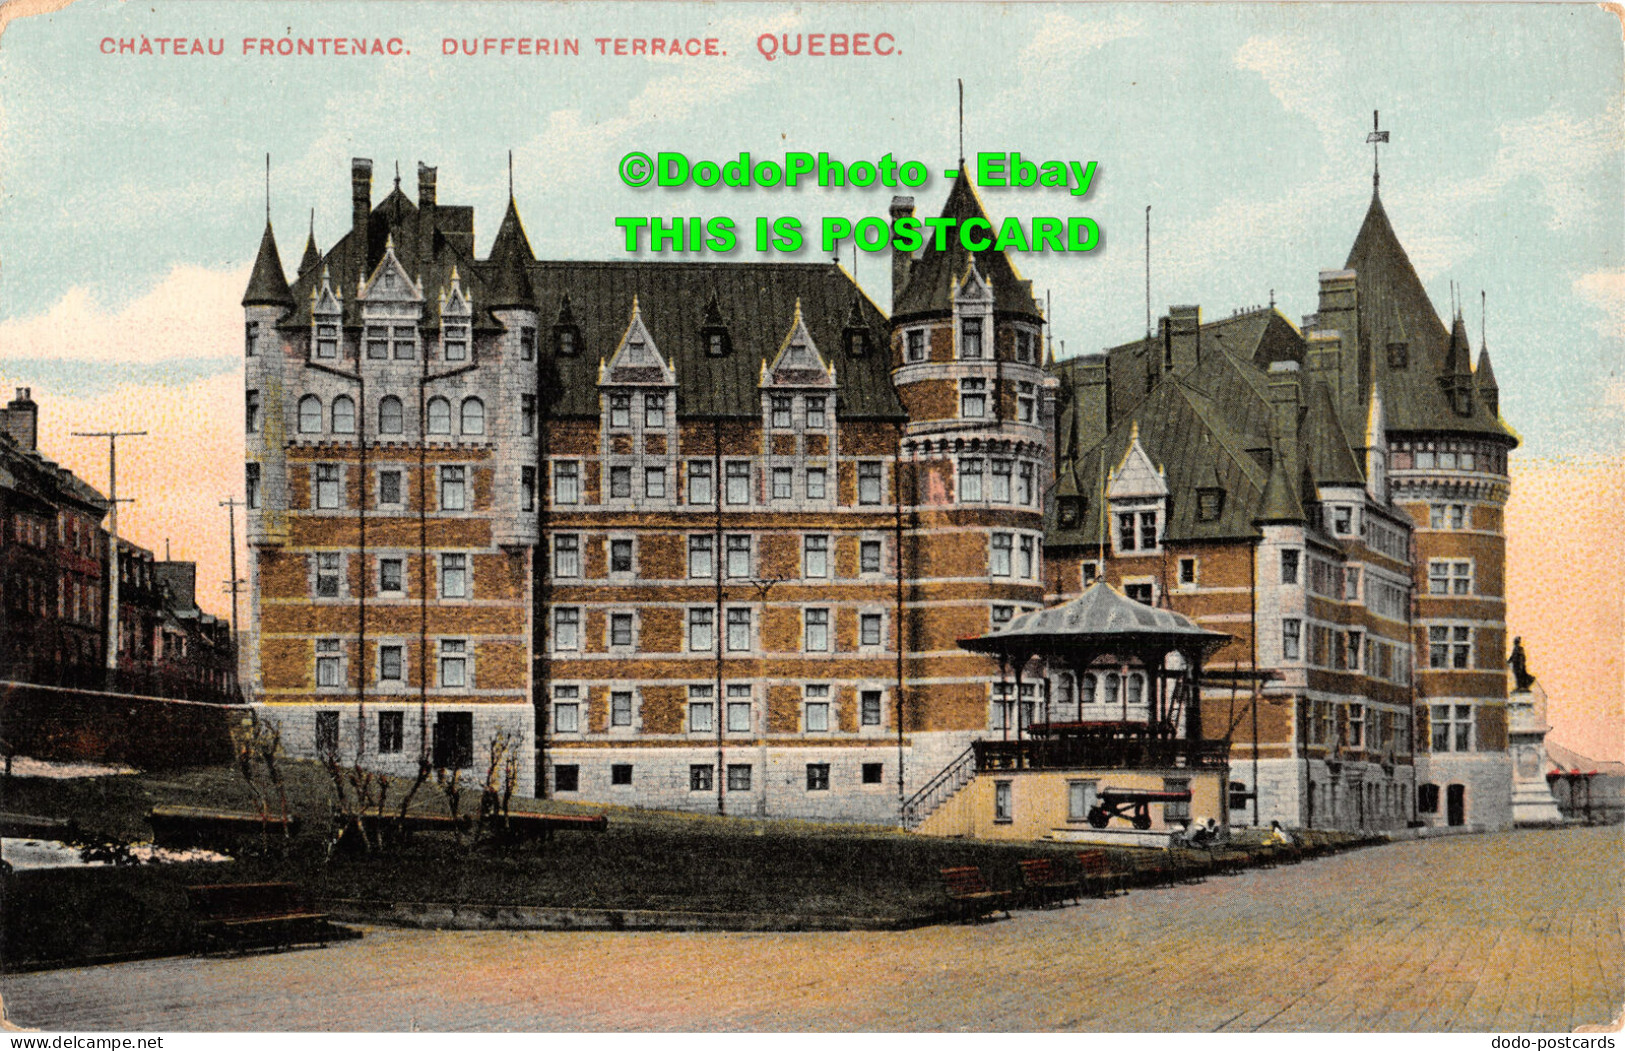 R377112 Quebec. Chateau Frontenac. Dufferin Terrace. Montreal Import Co. No. 202 - Welt